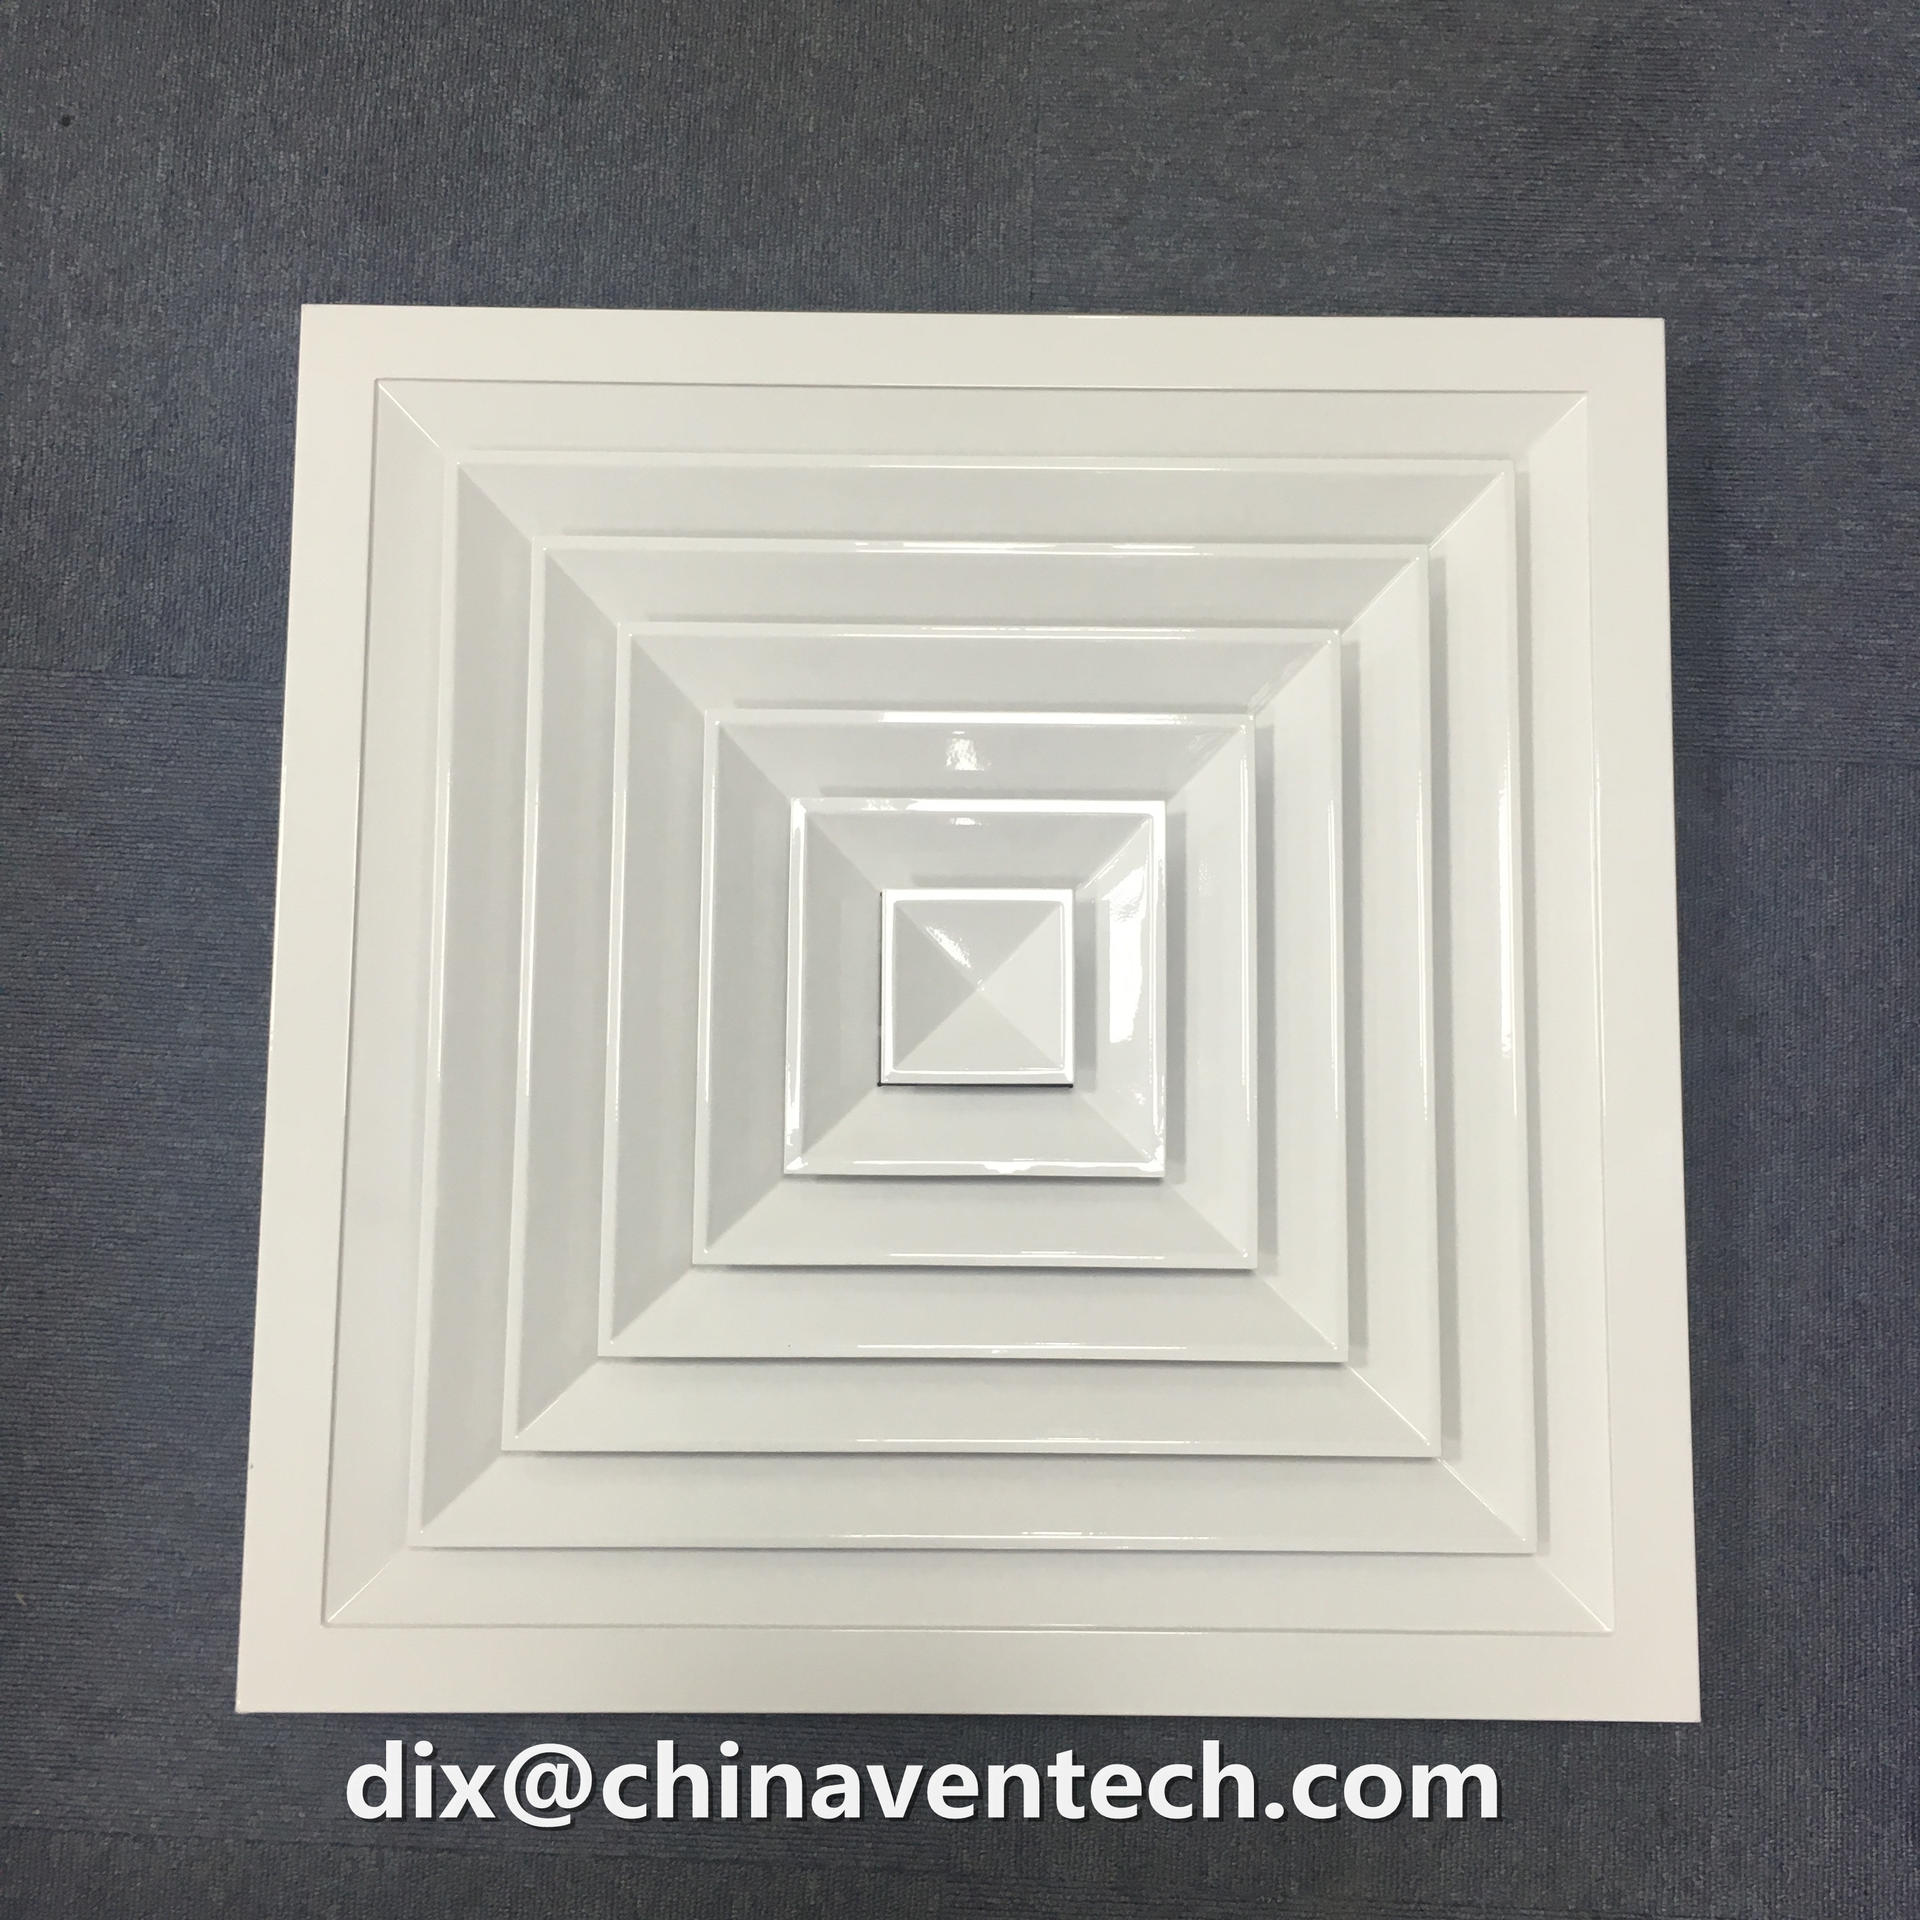 Hvac Ceiling Aluminum Square Air Diffuser Central Air-conditioning Louver Vents Air Outlets